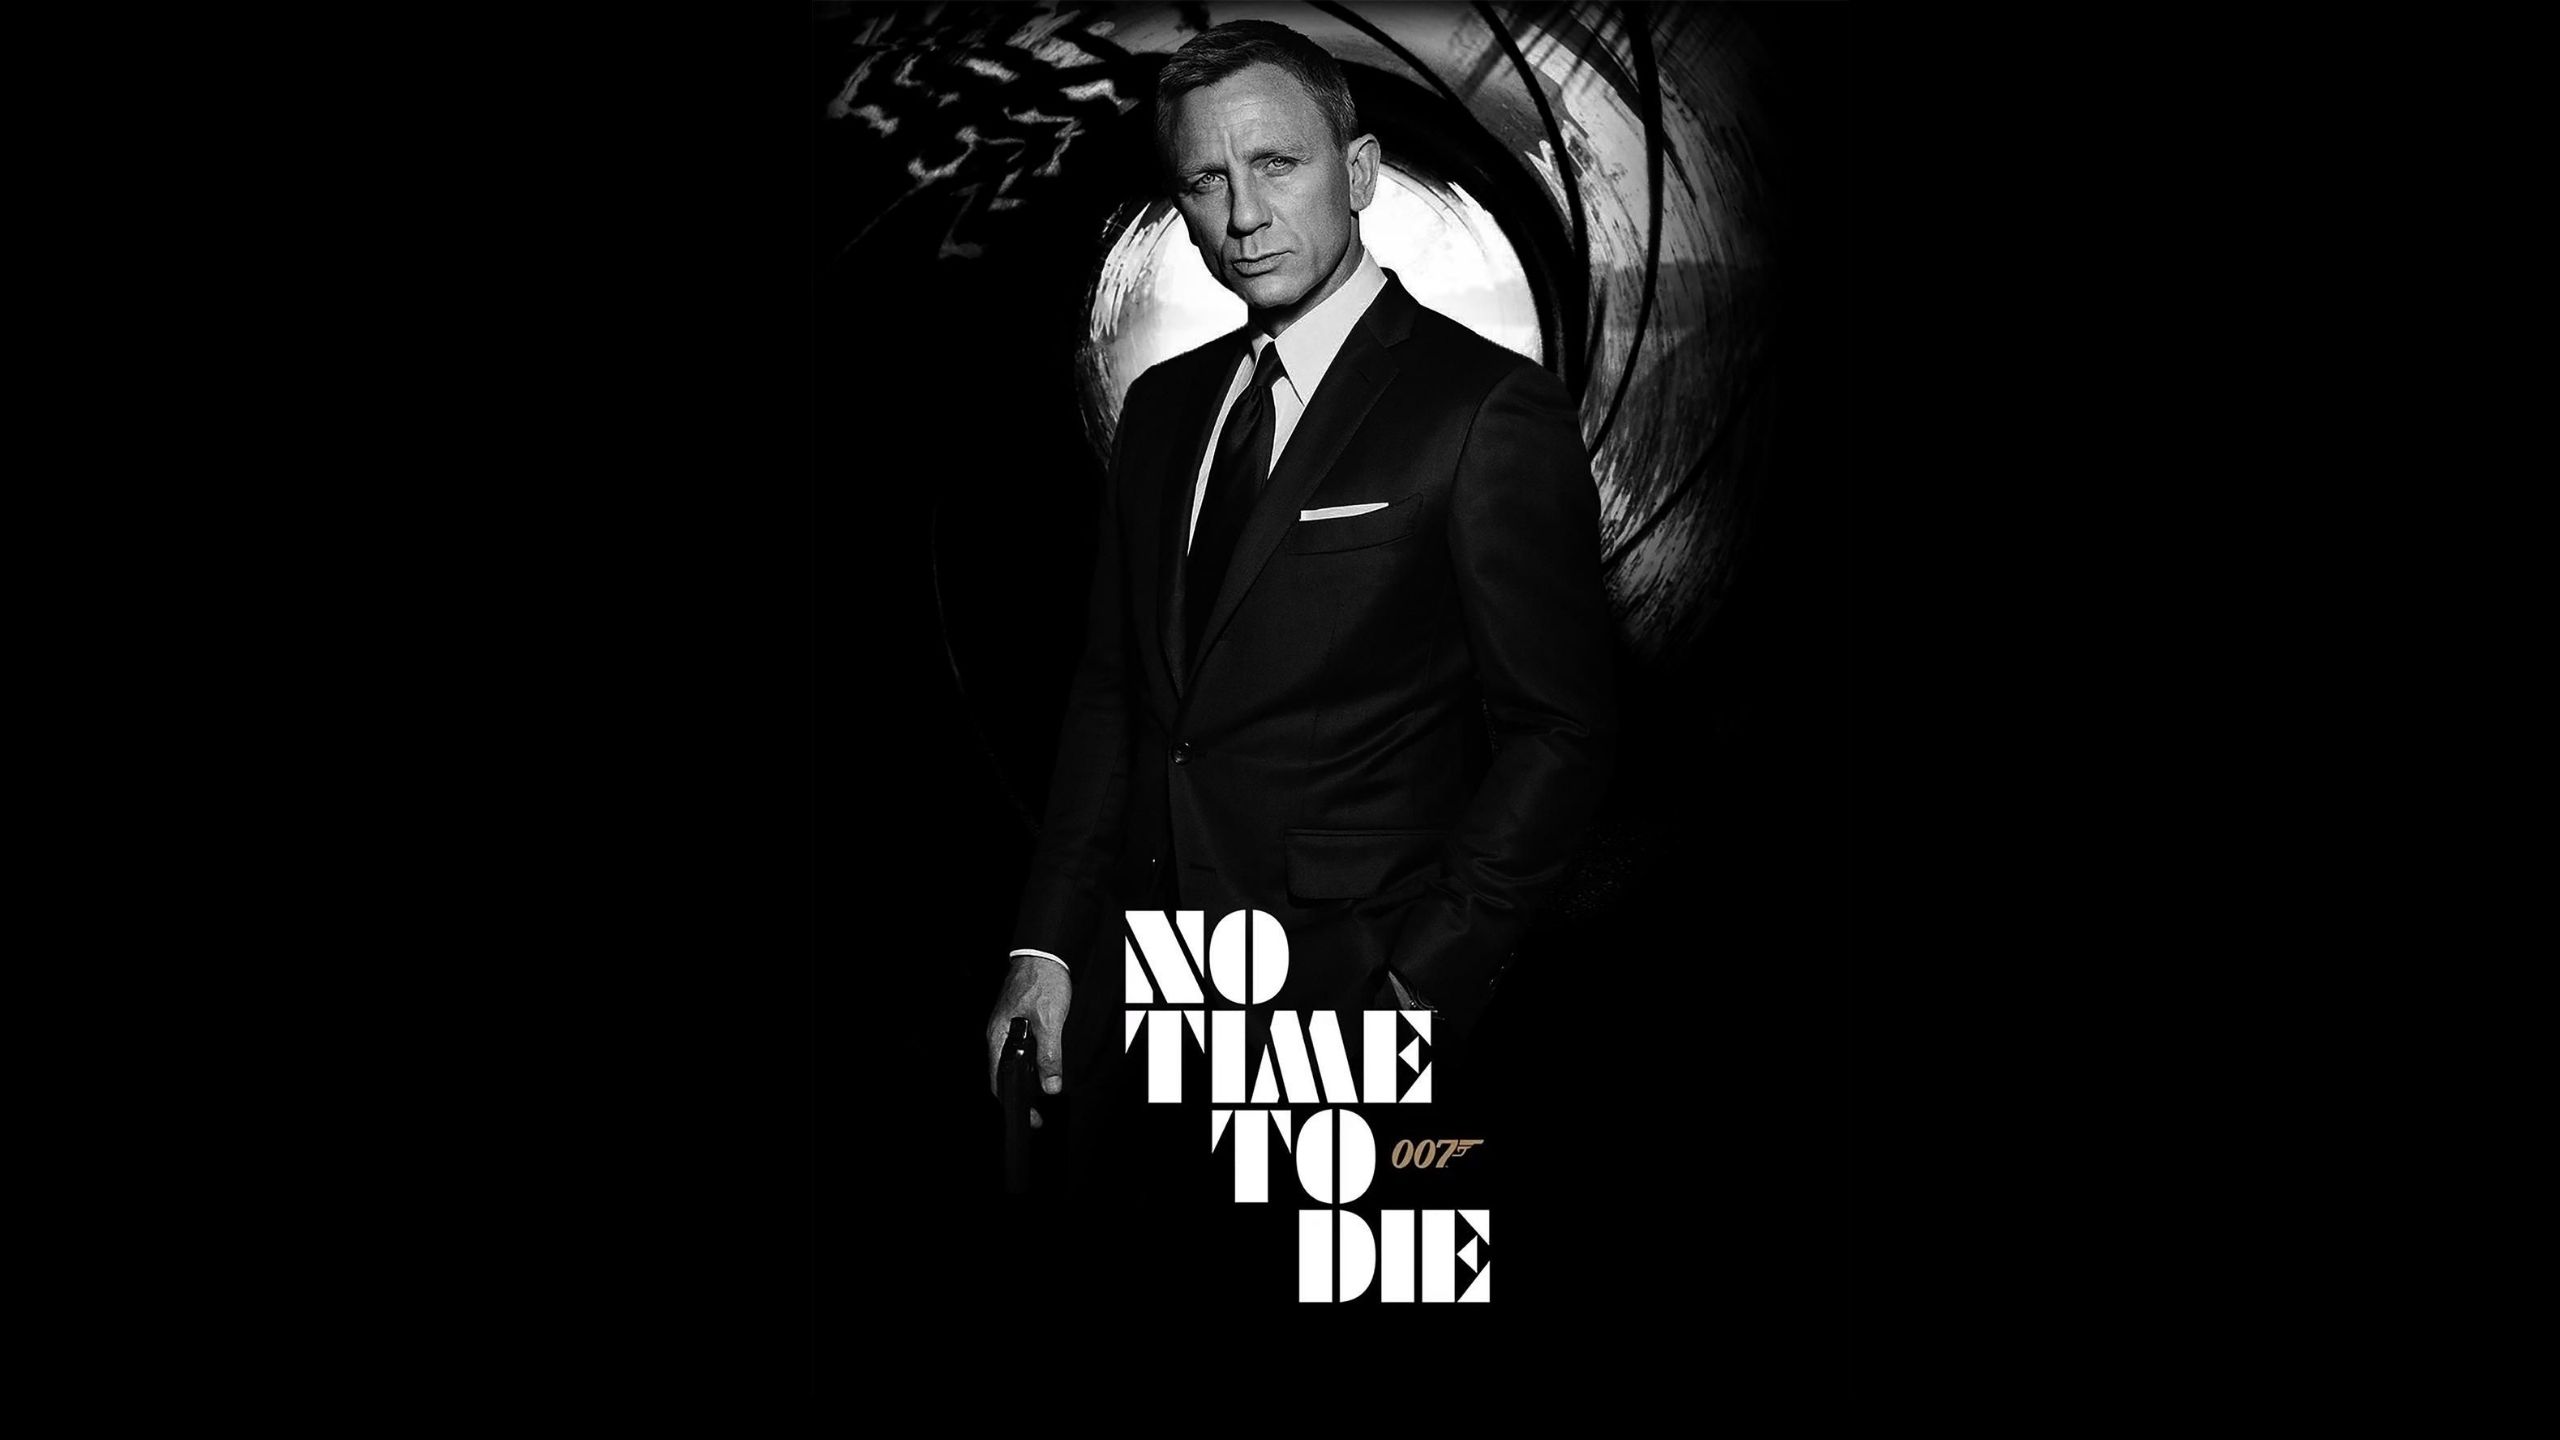 As planned The second trailer of 007 No Time To Die has arrived! 